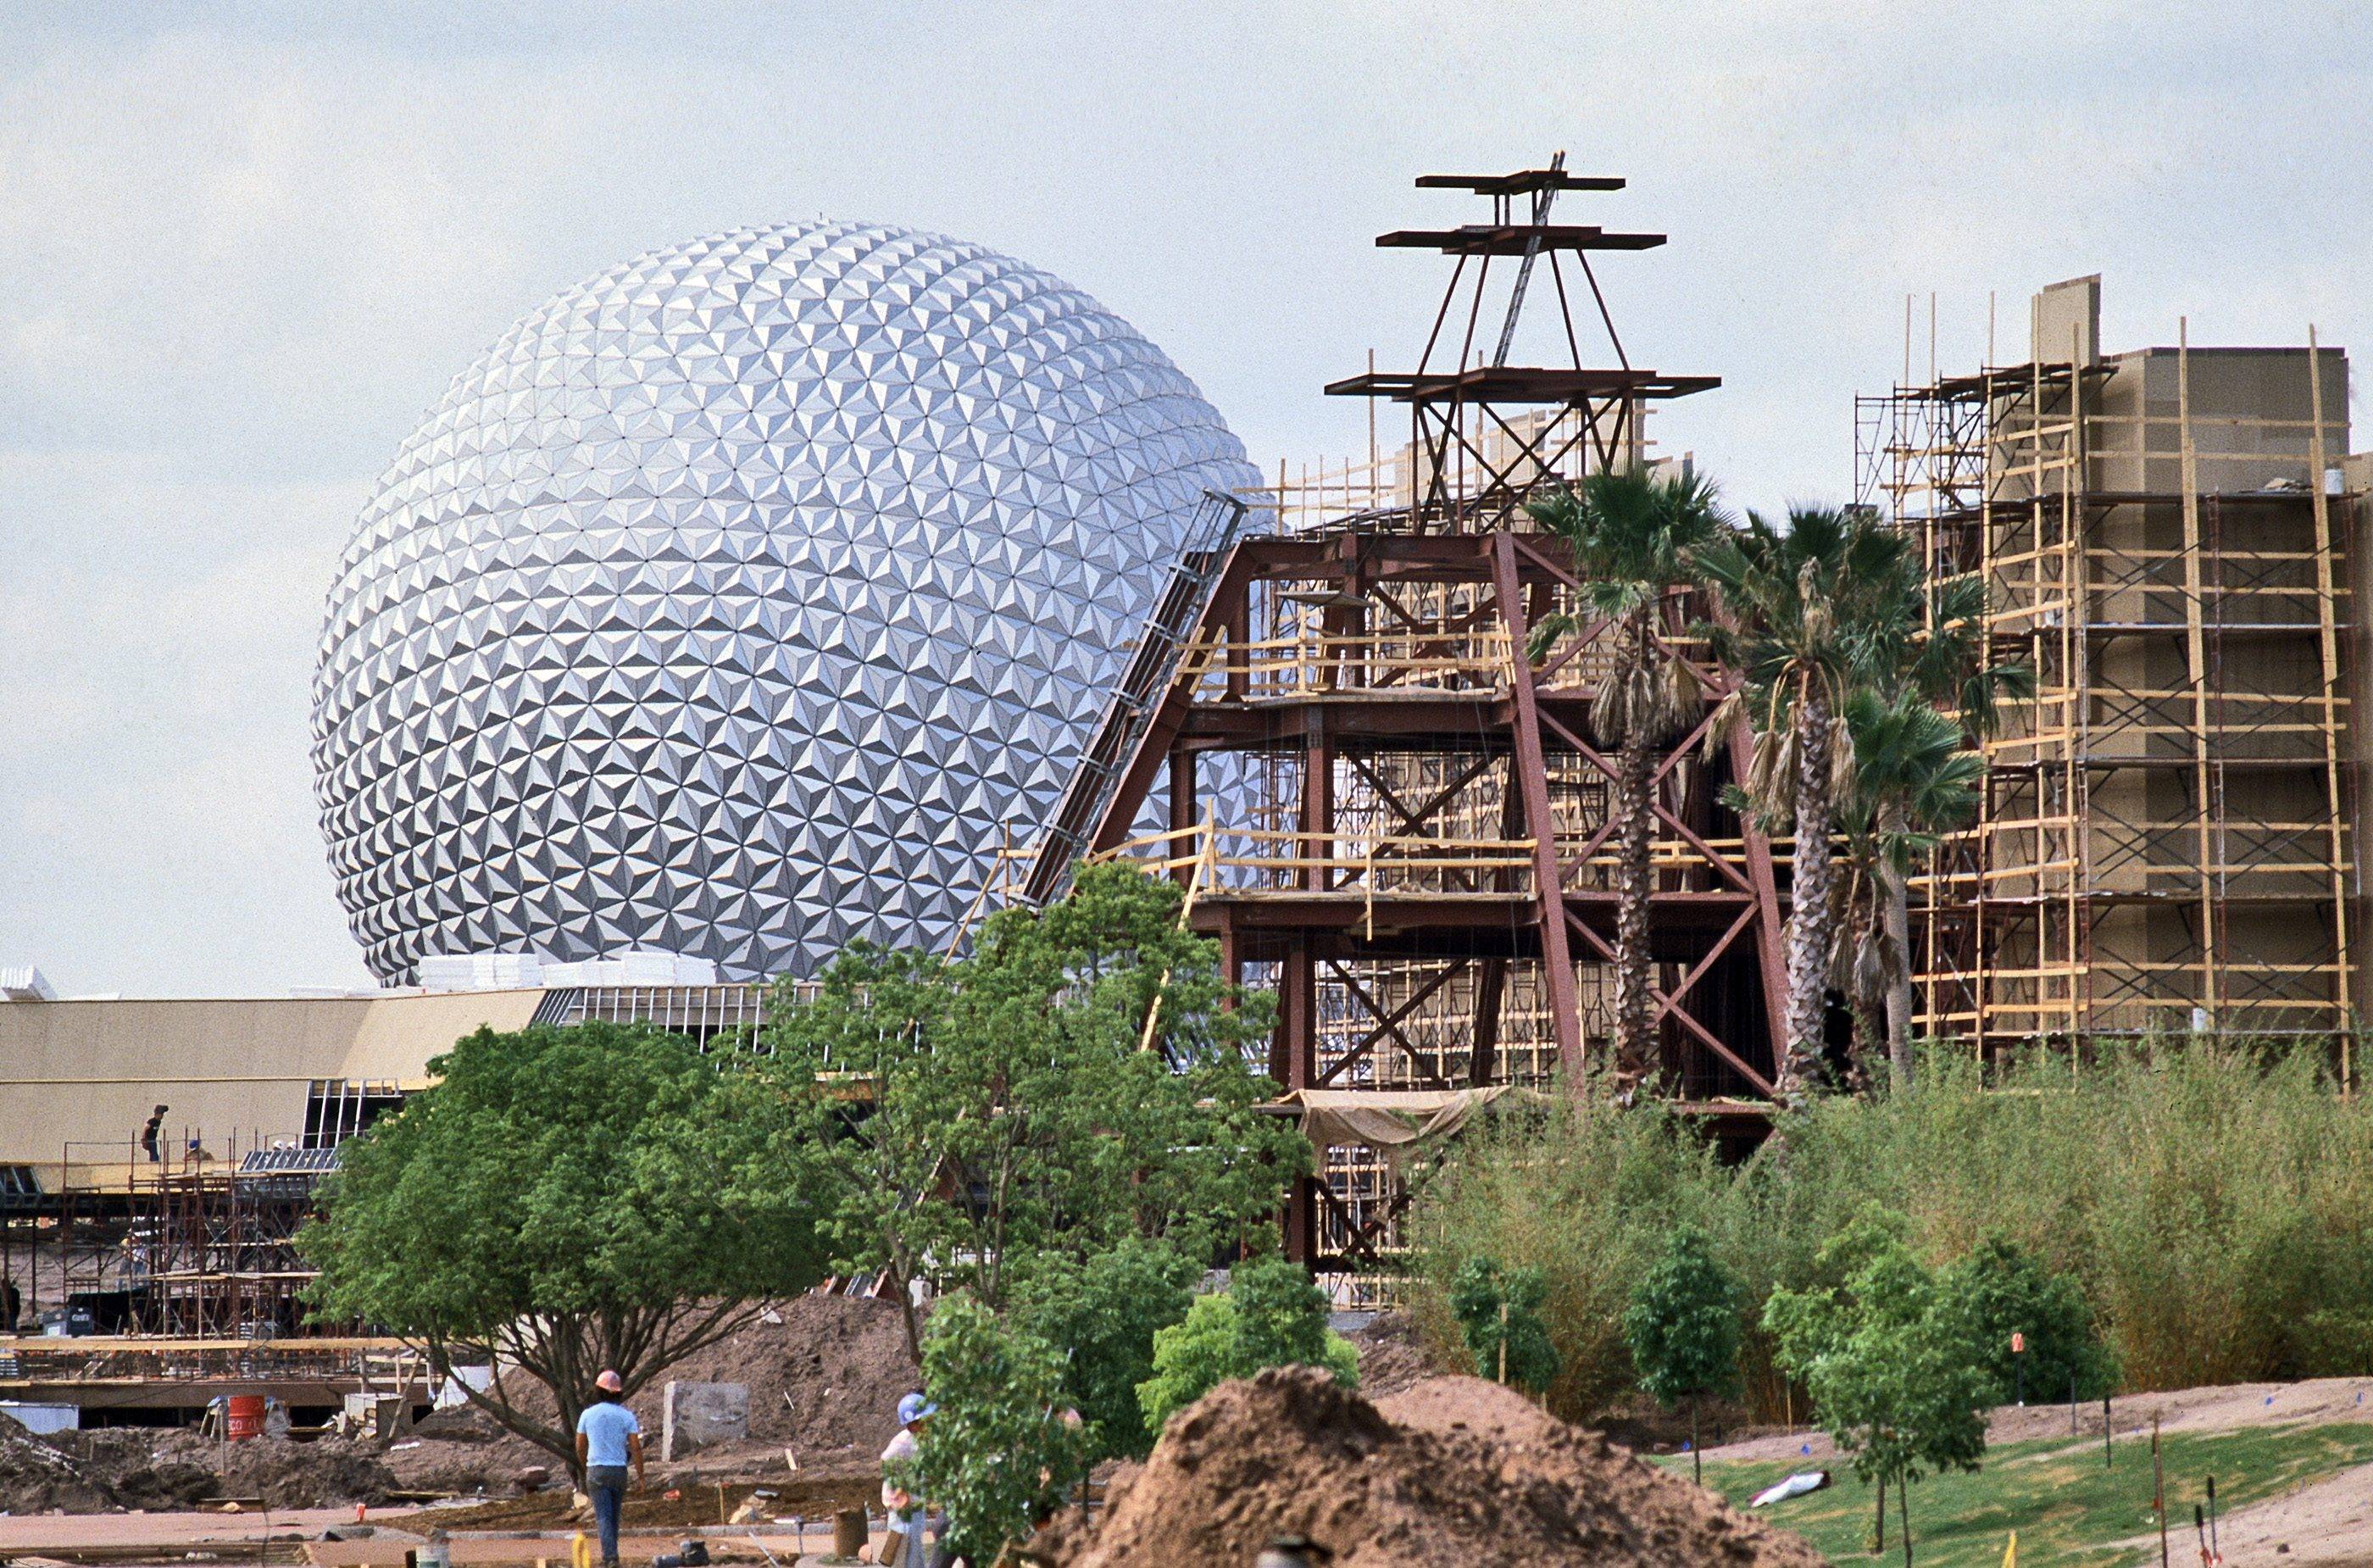 In 1982, construction continues on the Mexico Pavilion in EPCOT